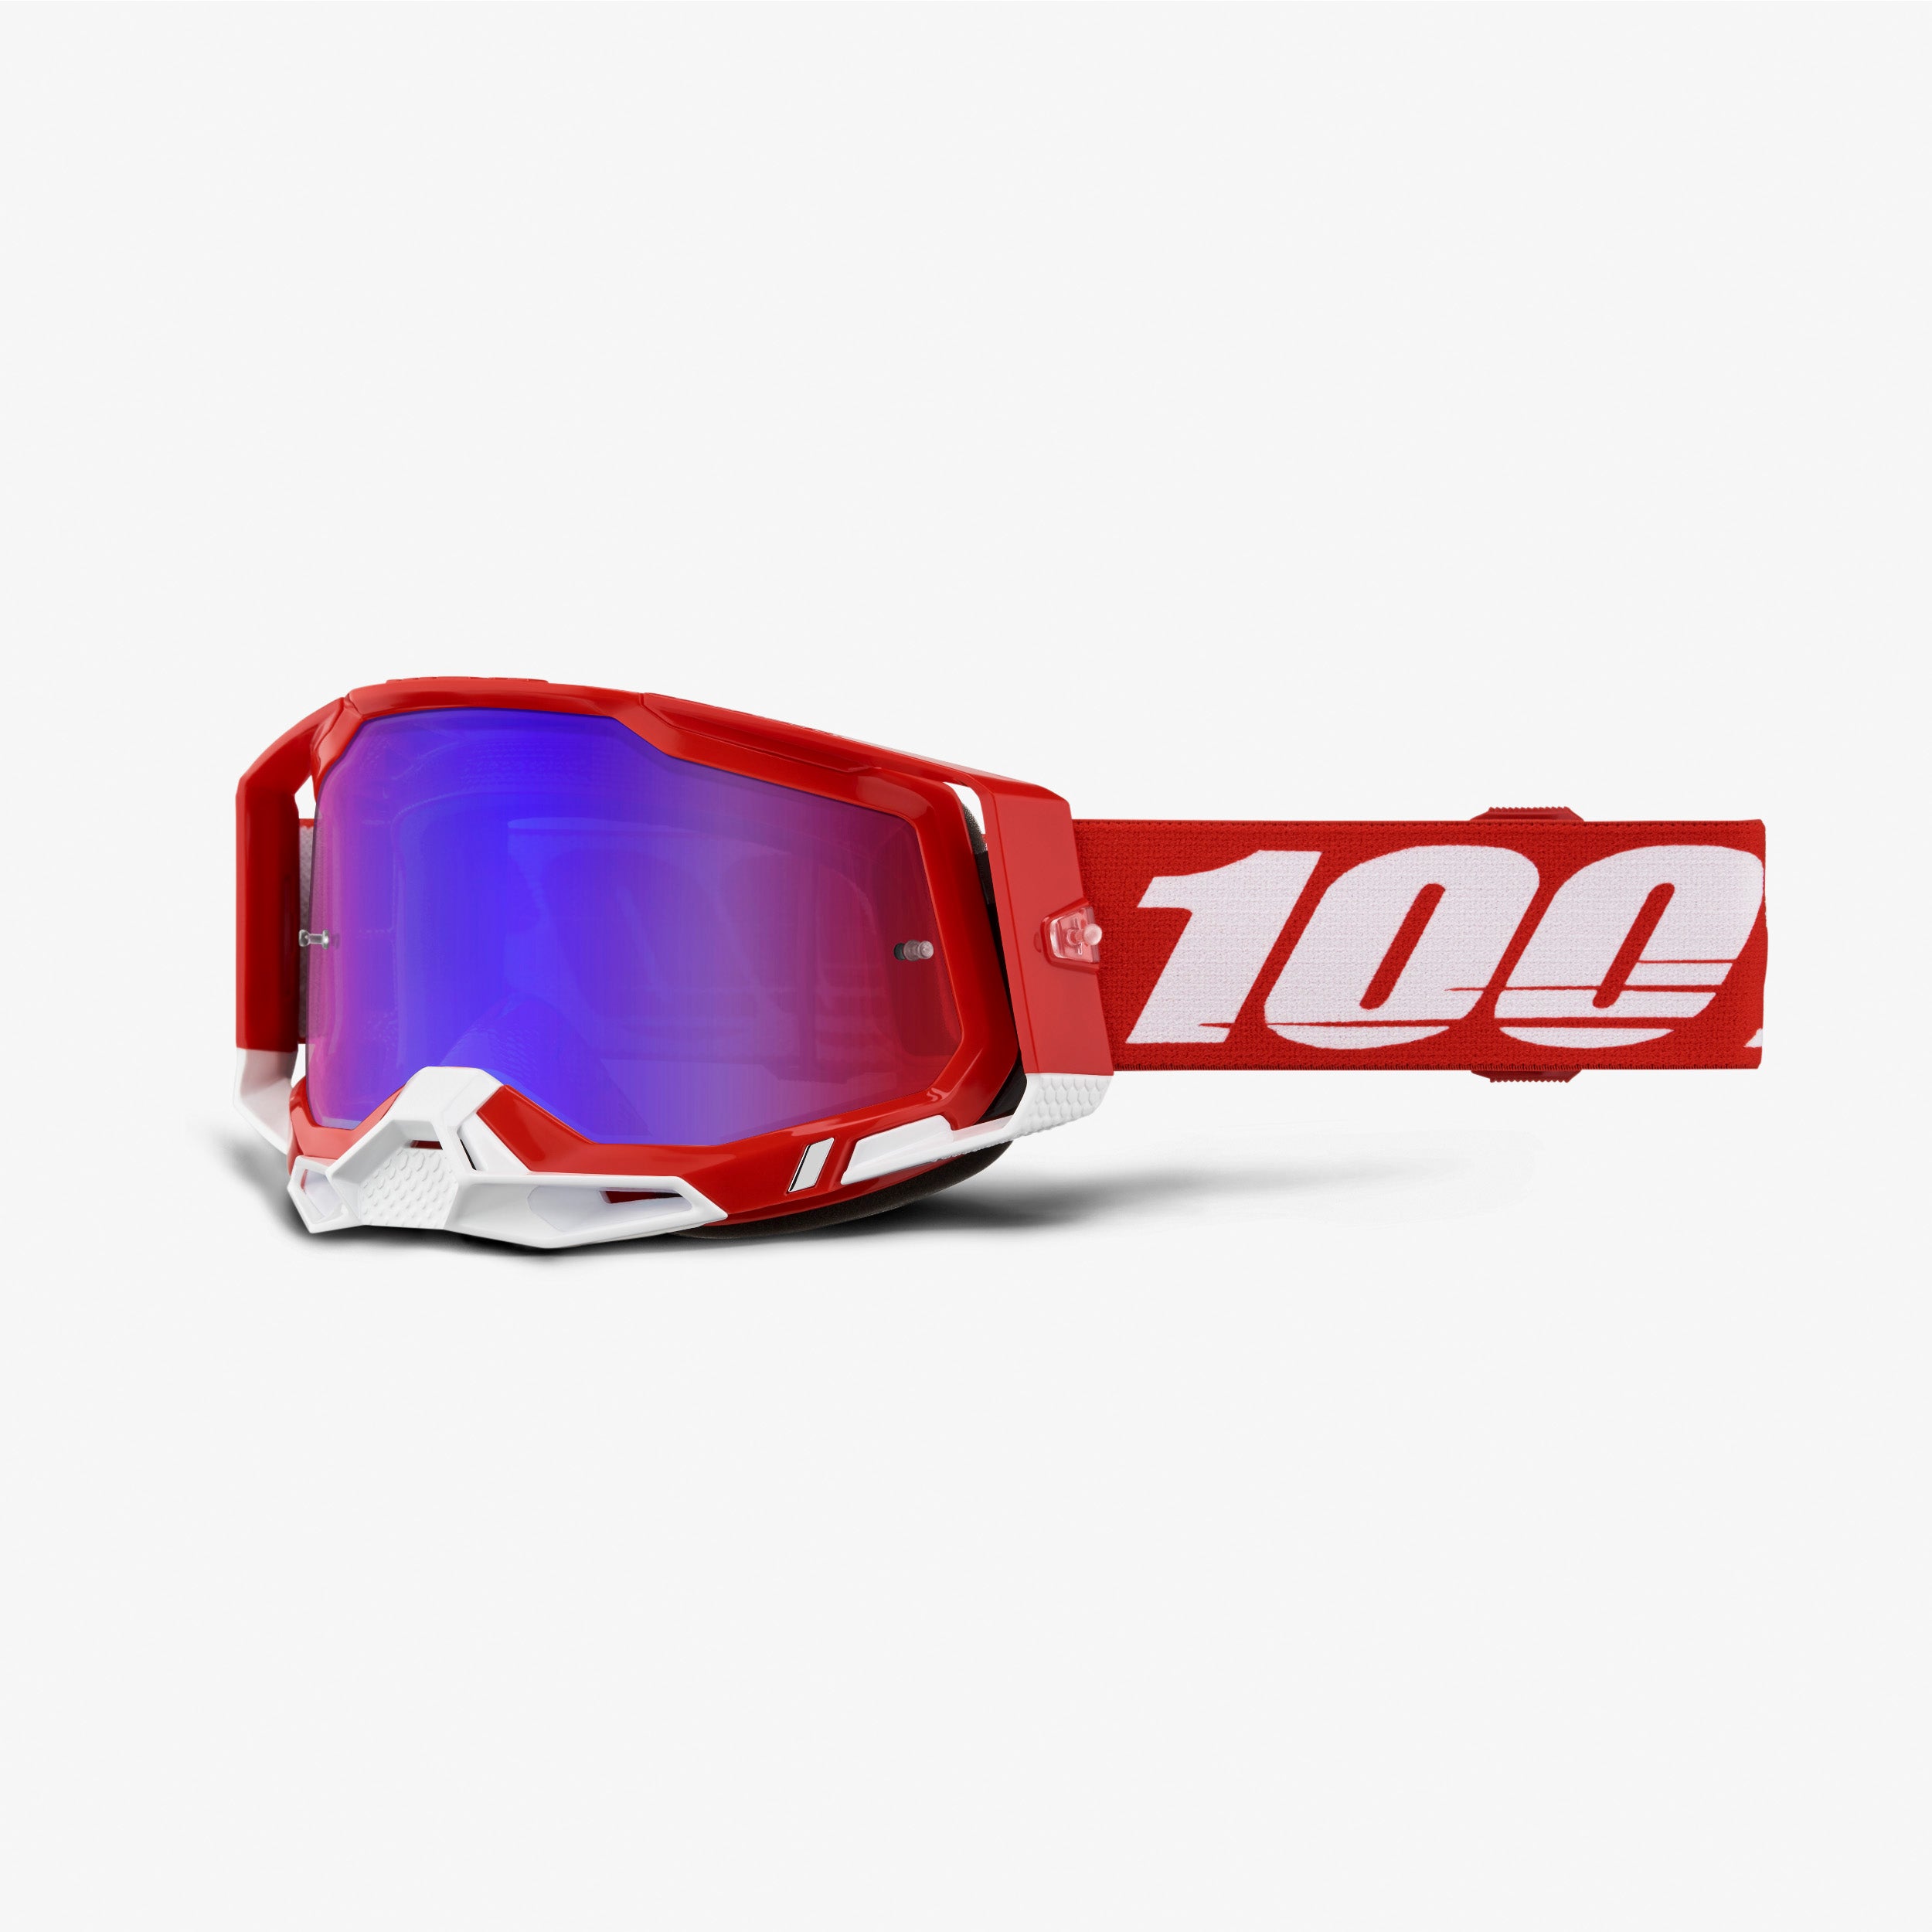 RACECRAFT 2 Goggle Red